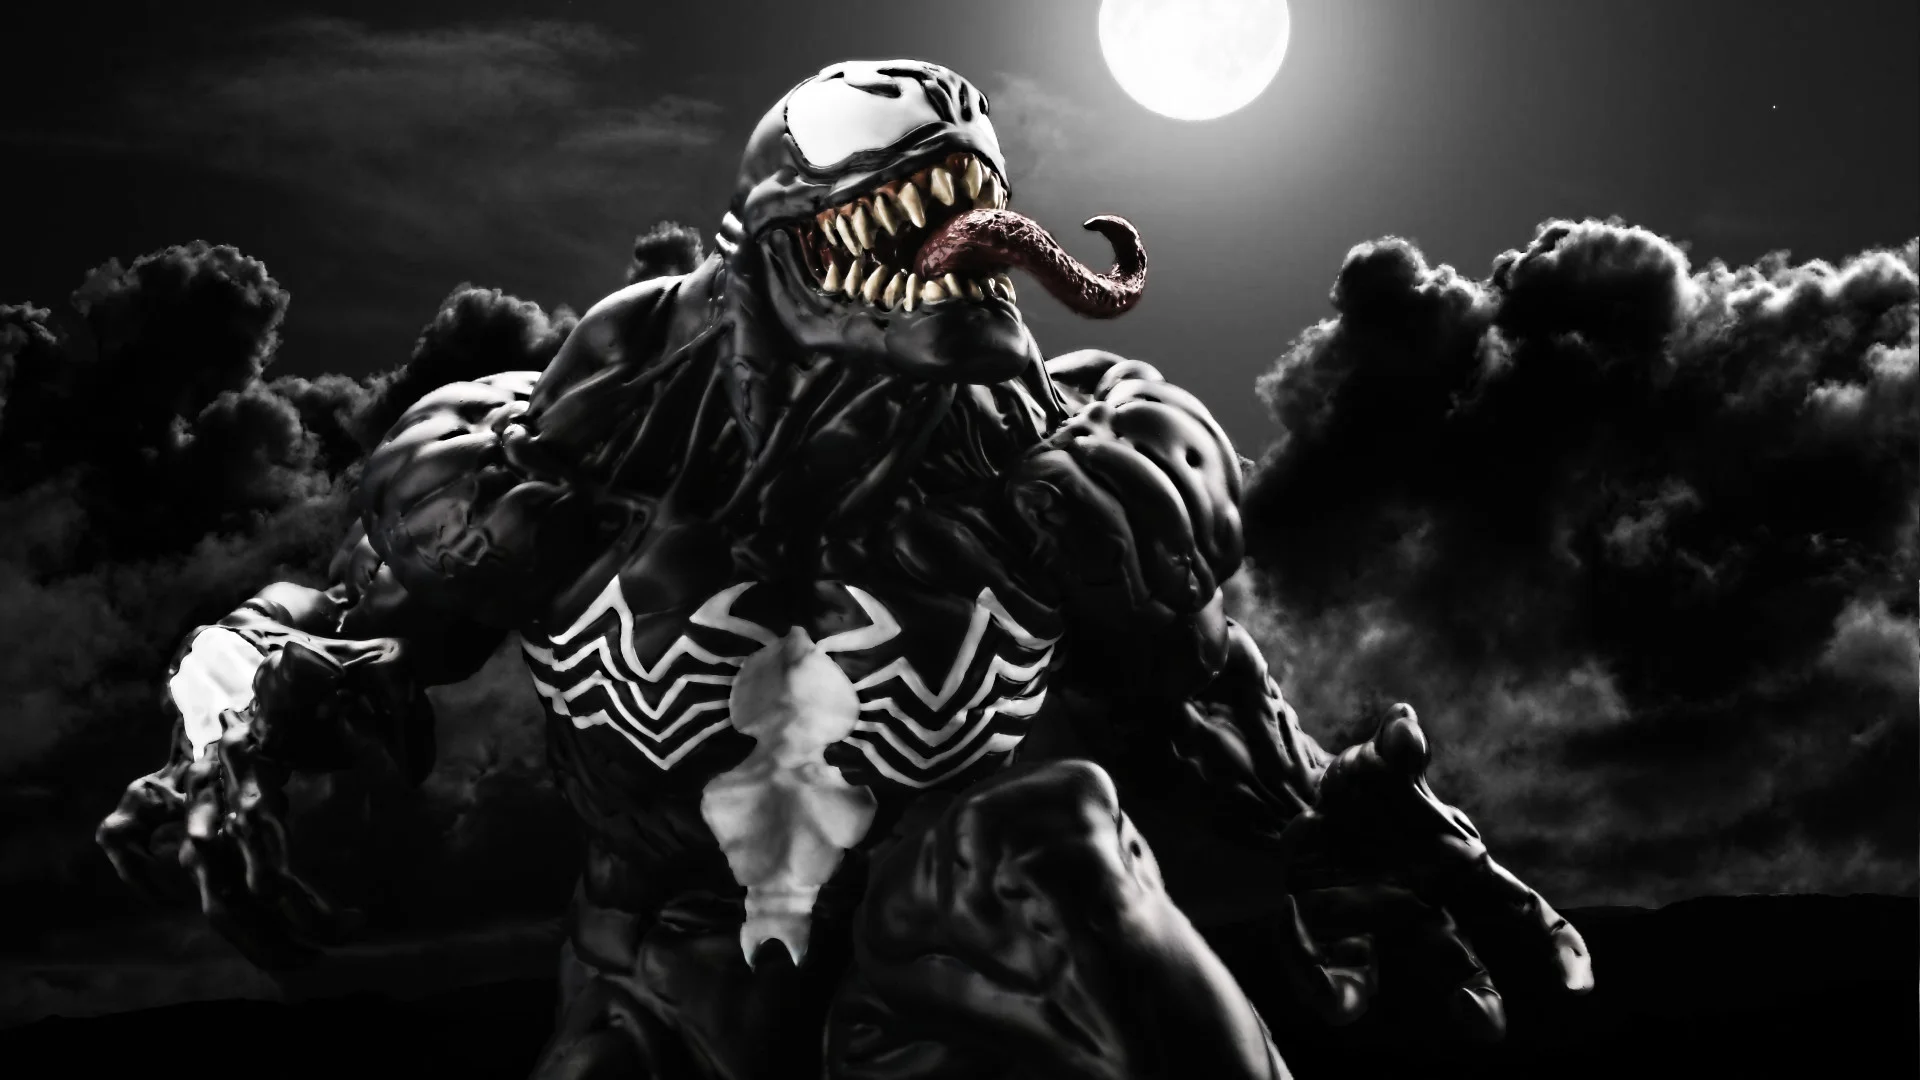 0 Venom Wallpapers | Wallpaper Cave Venom Wallpapers Images Photos Pictures  Backgrounds